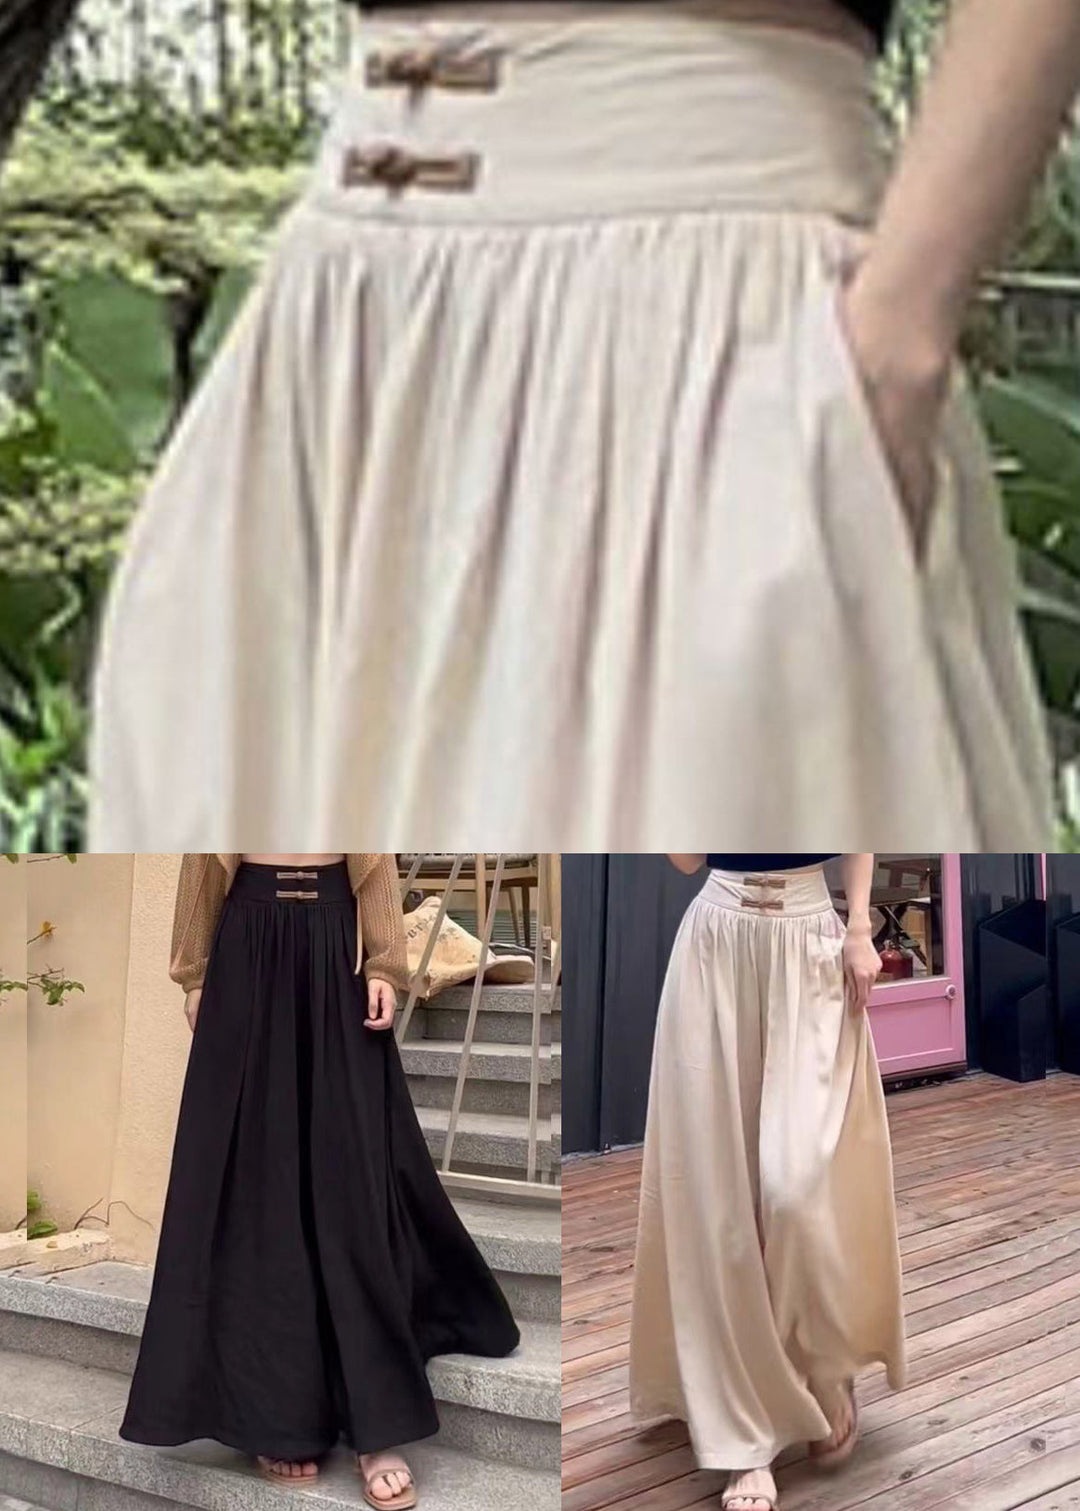 Women Apricot Wrinkled High Waist Cotton Pants Spring